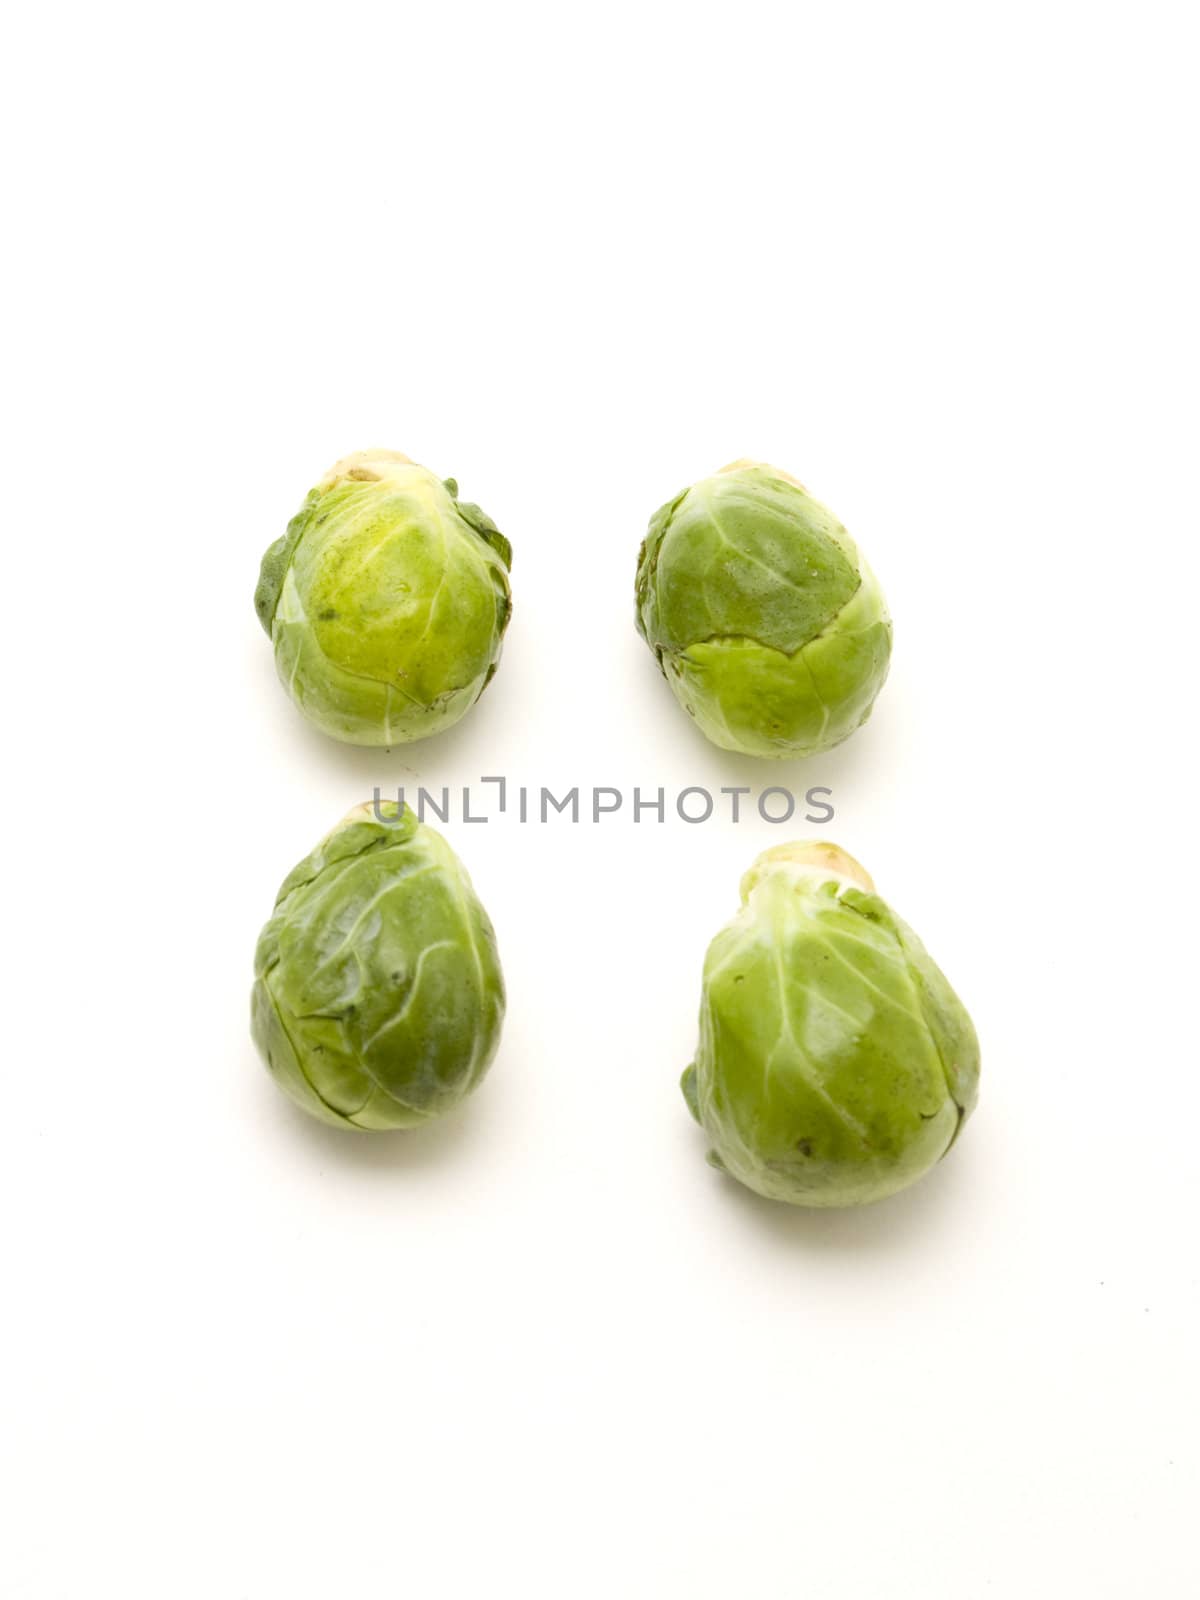  Brussels cabbage by lauria